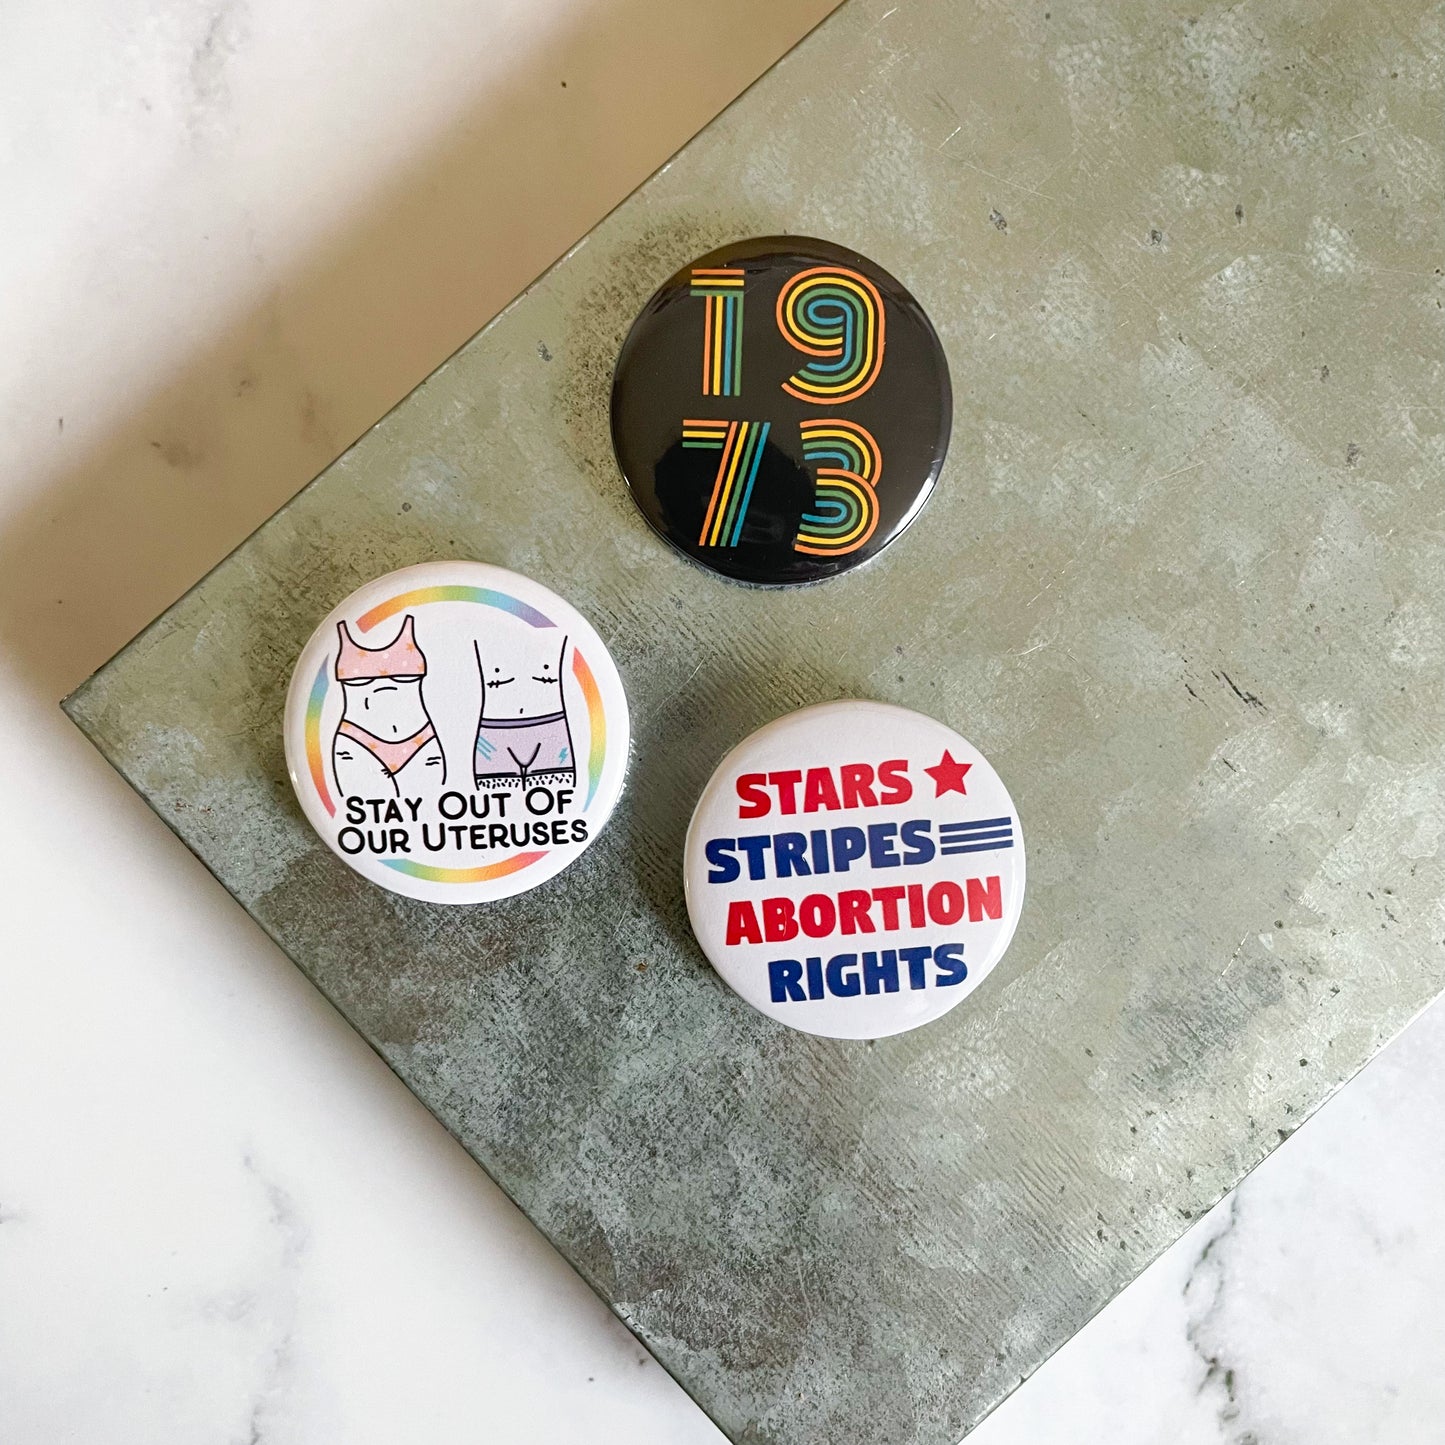 Stars Stripes Abortion Rights Button / Badge (Buy 4 Get 1 FREE)